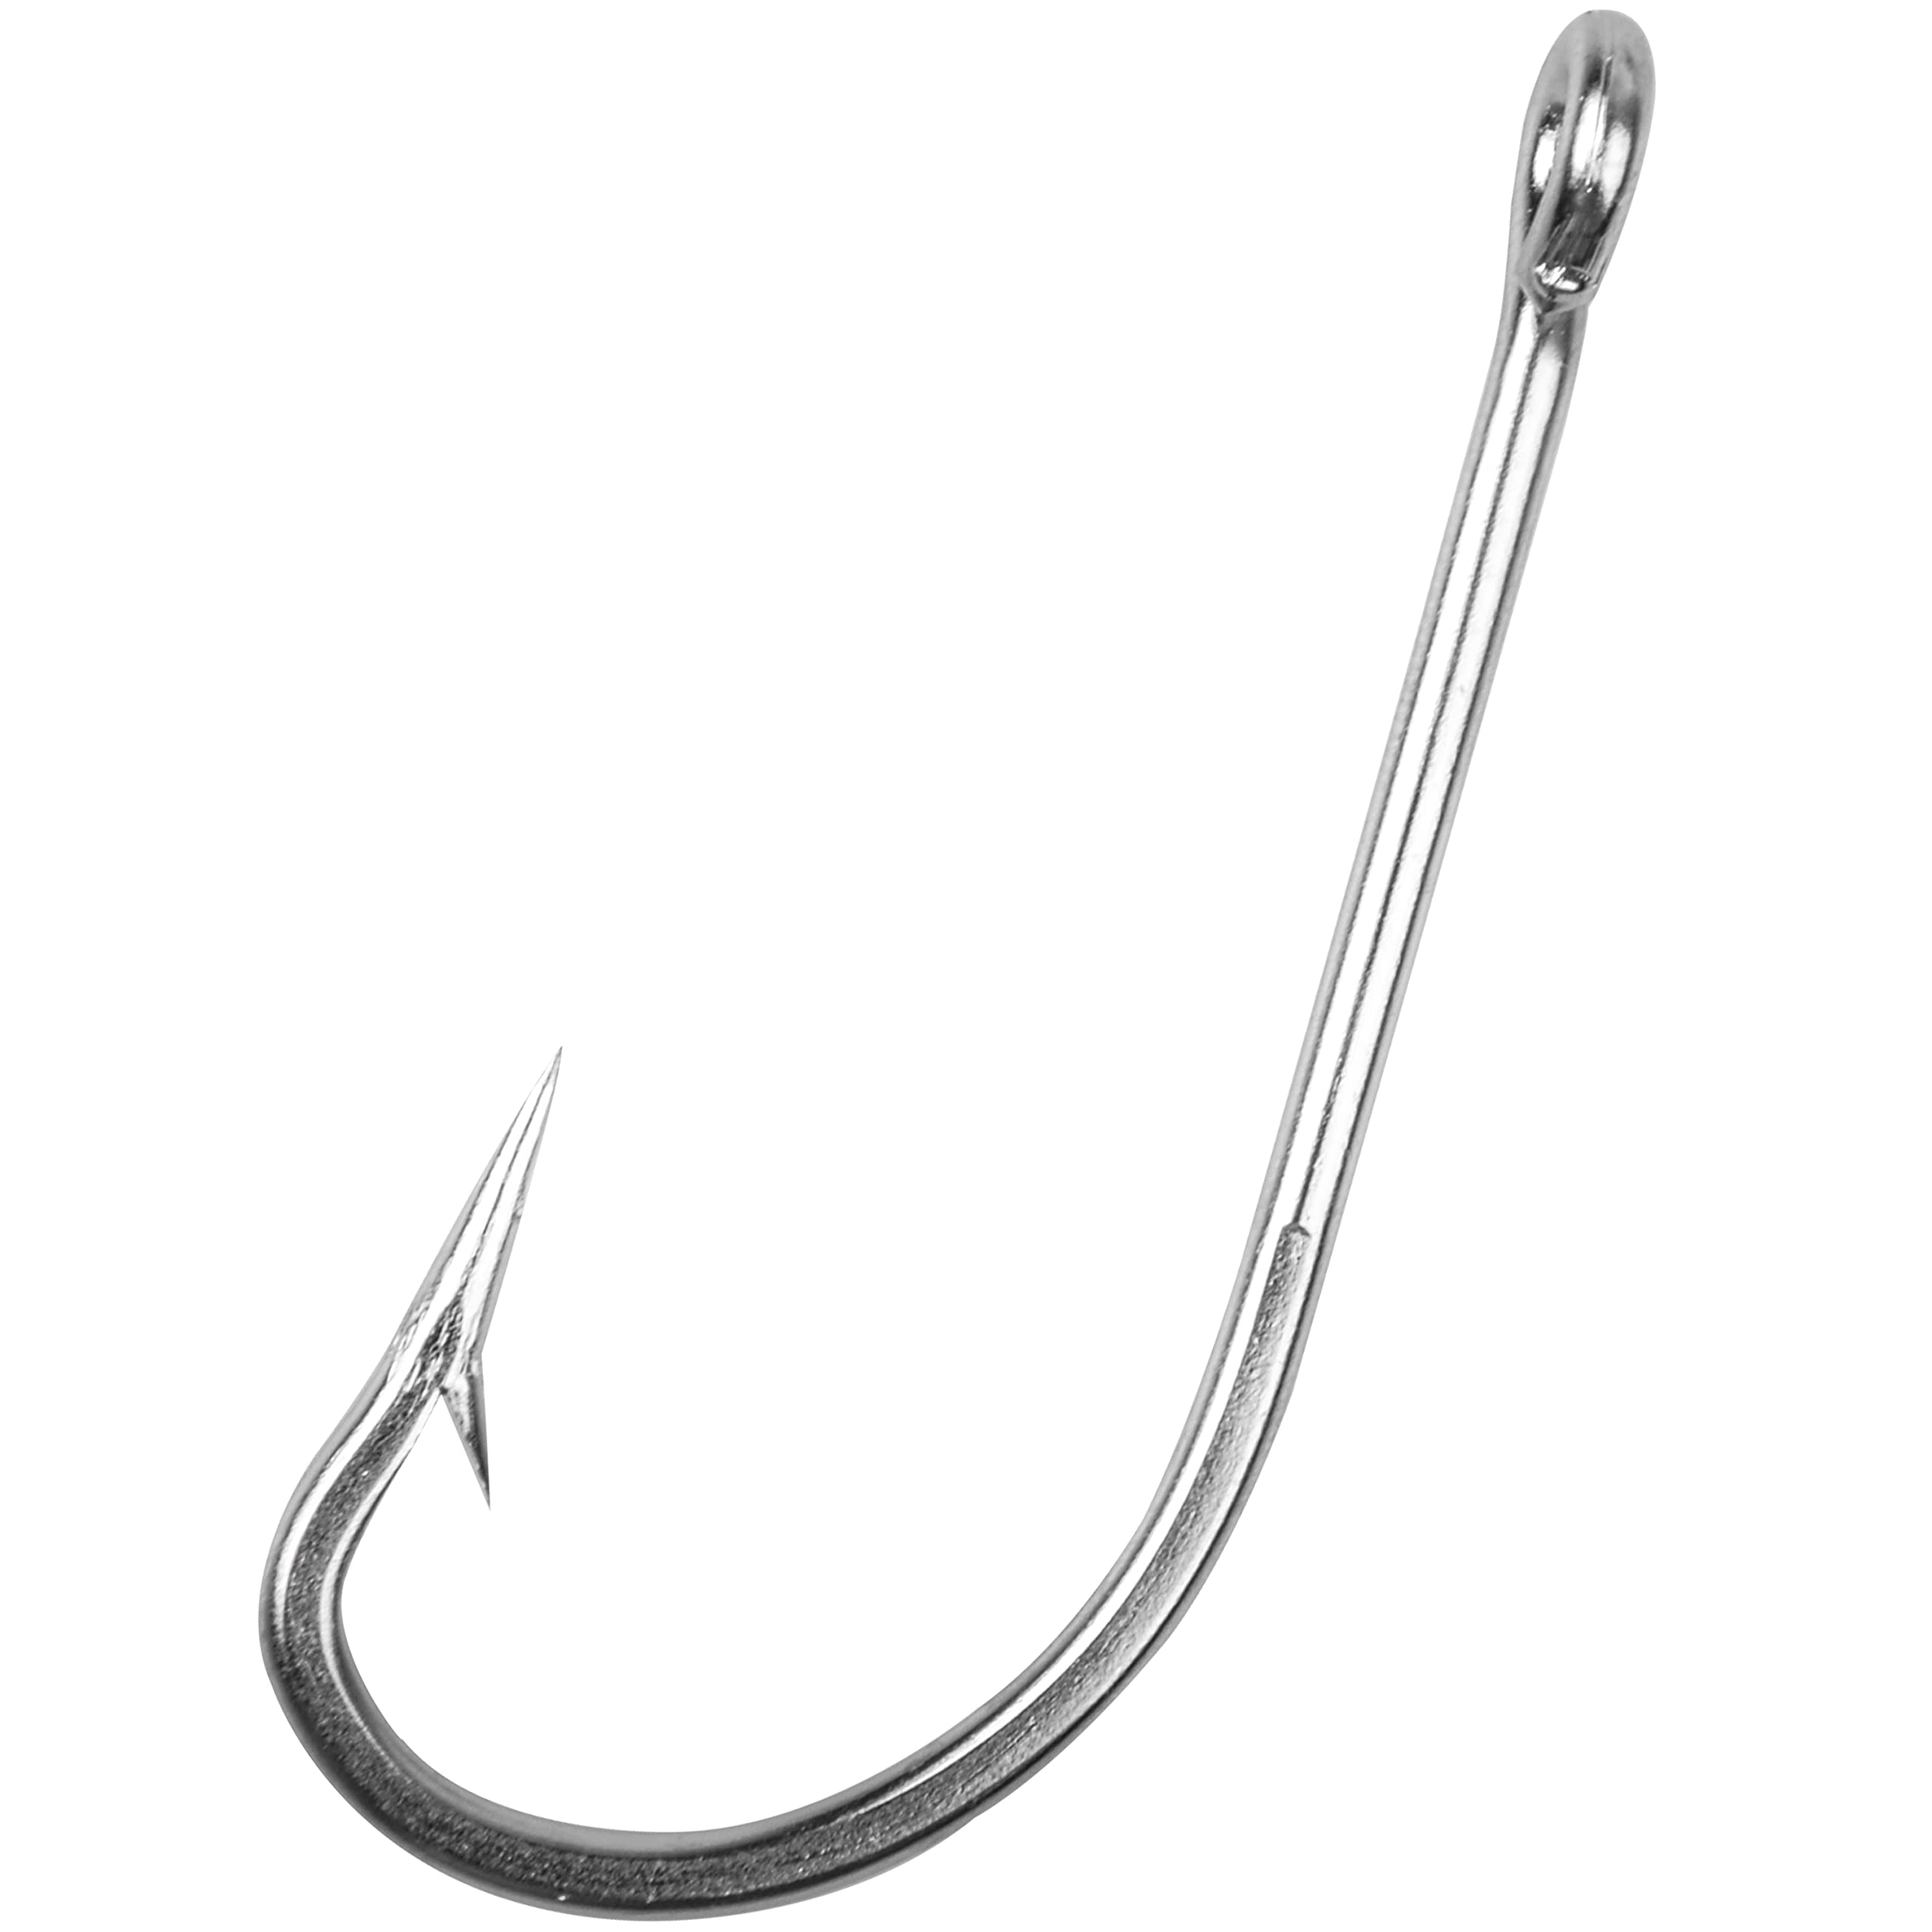 Buy Ezzy Saltwater Fishing Hook 6 pcs, Corrosion Resistant, Sharp, Durable,  Freshwater and Saltwater Fishing Hooks. Fishing Gear for Novice and  Experienced Anglers. Online at Best Prices in India - JioMart.